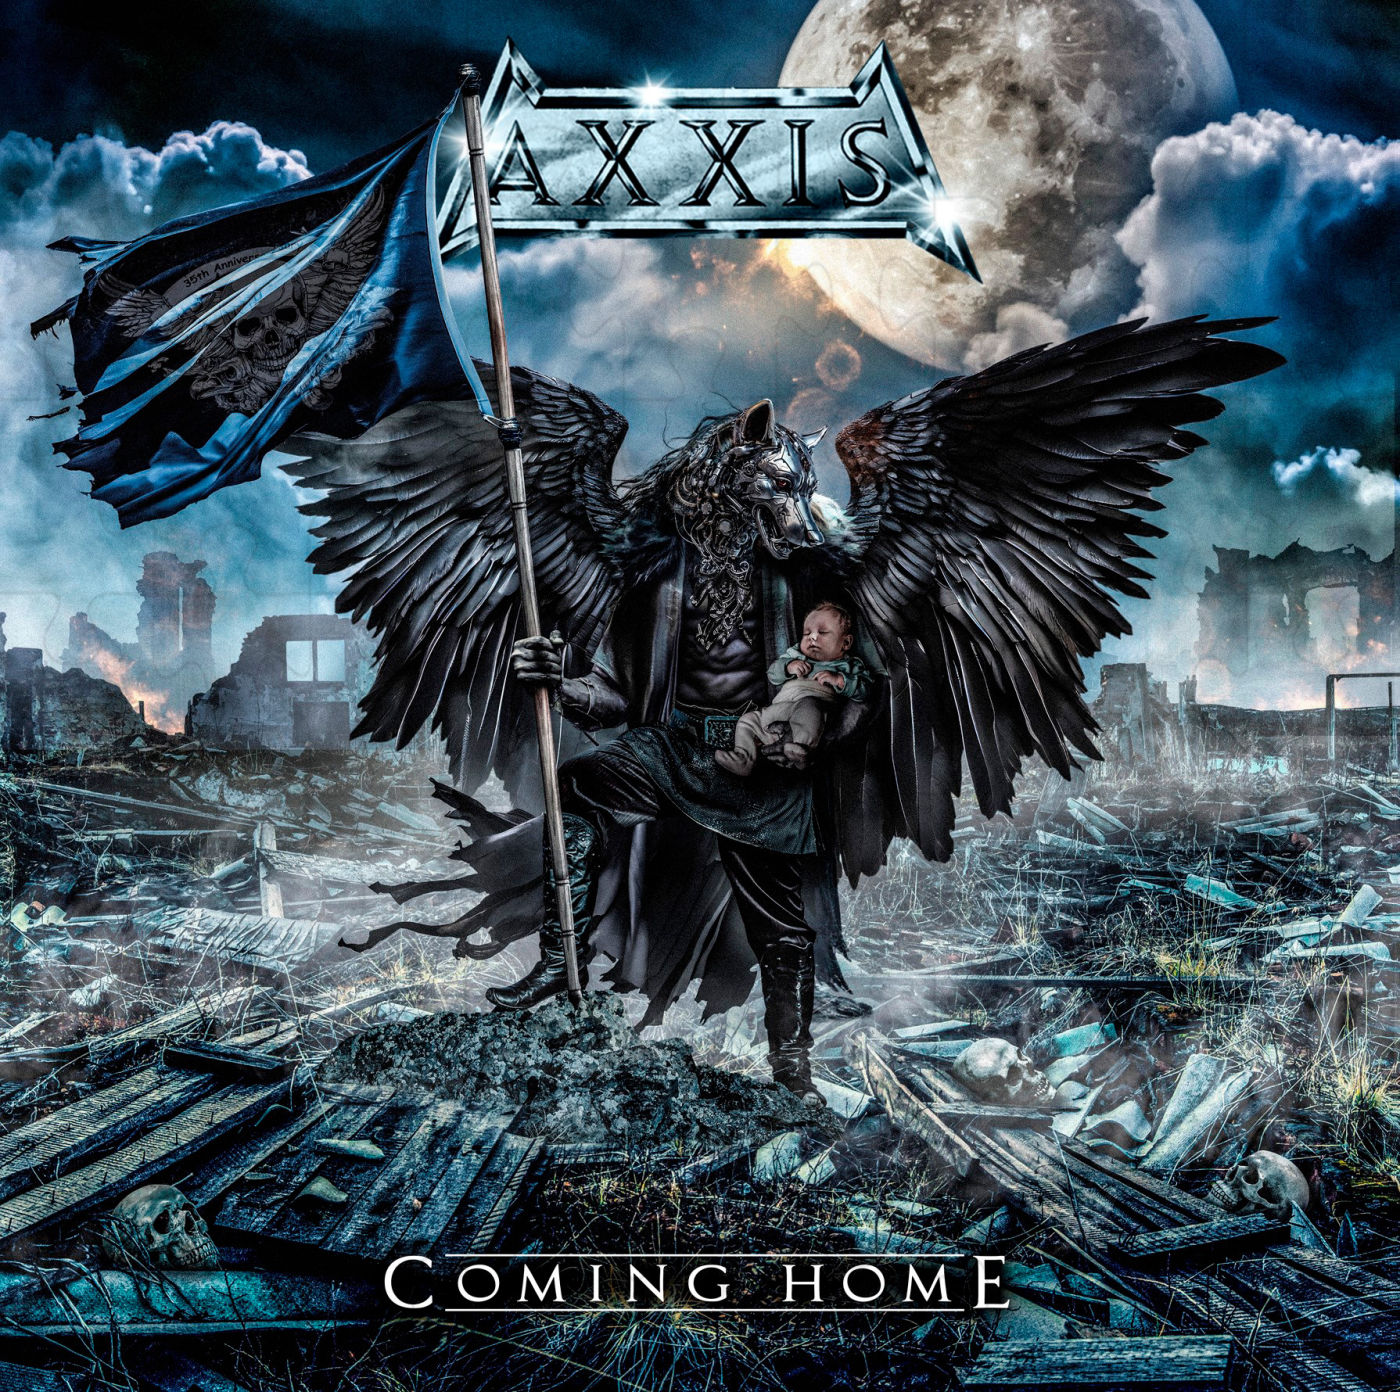 AXXIS Coming Home album